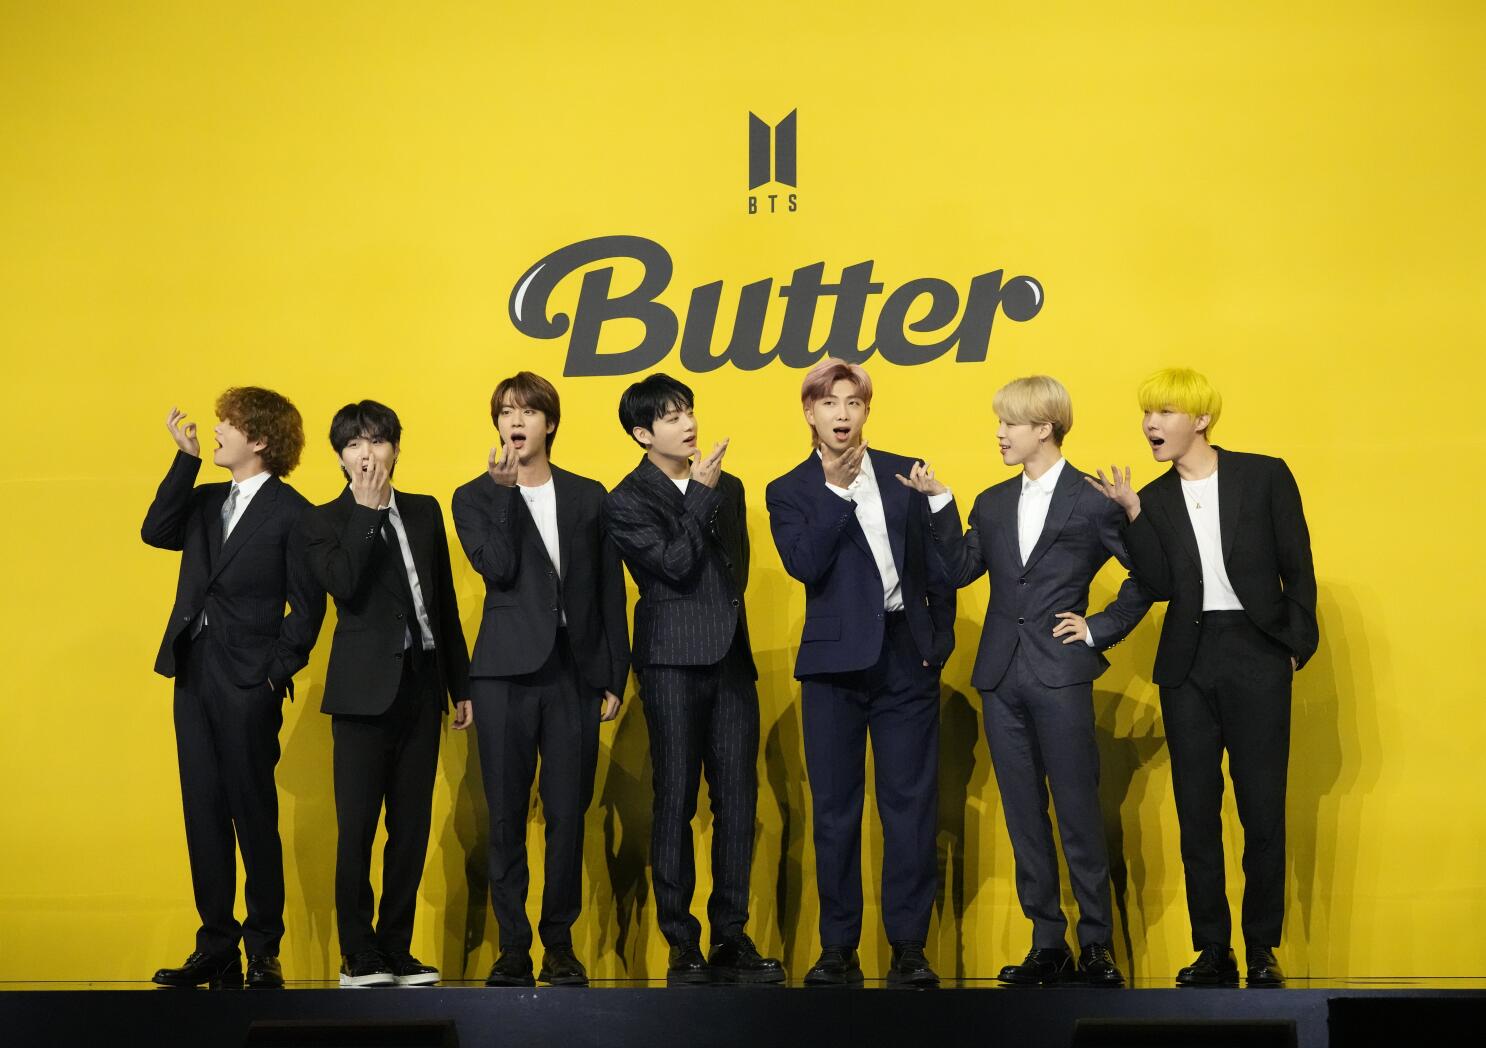 K-pop groups: The next great brand collaboration, Marketing